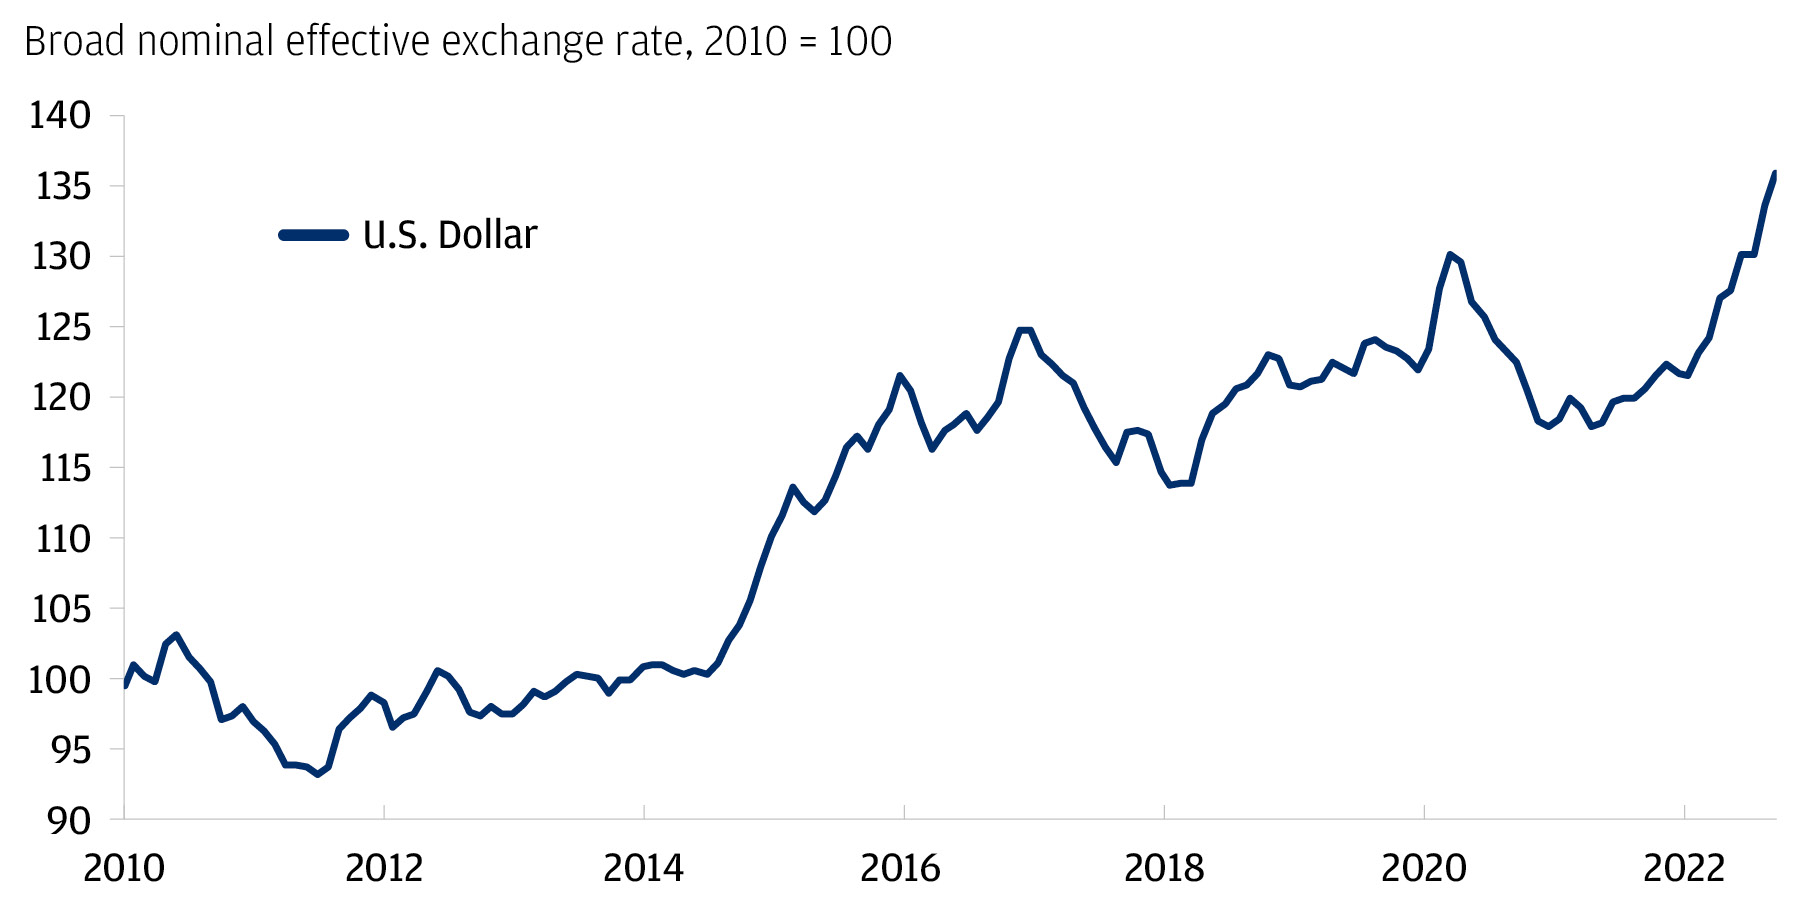 Line chart of the broad trade weighted nominal effective exchange rate of the U.S. dollar since 2010 through October 2022. The dollar declined significantly in the latter half of 2020 and has since risen meaningfully to the highest level we’ve seen in the past 12 years. 